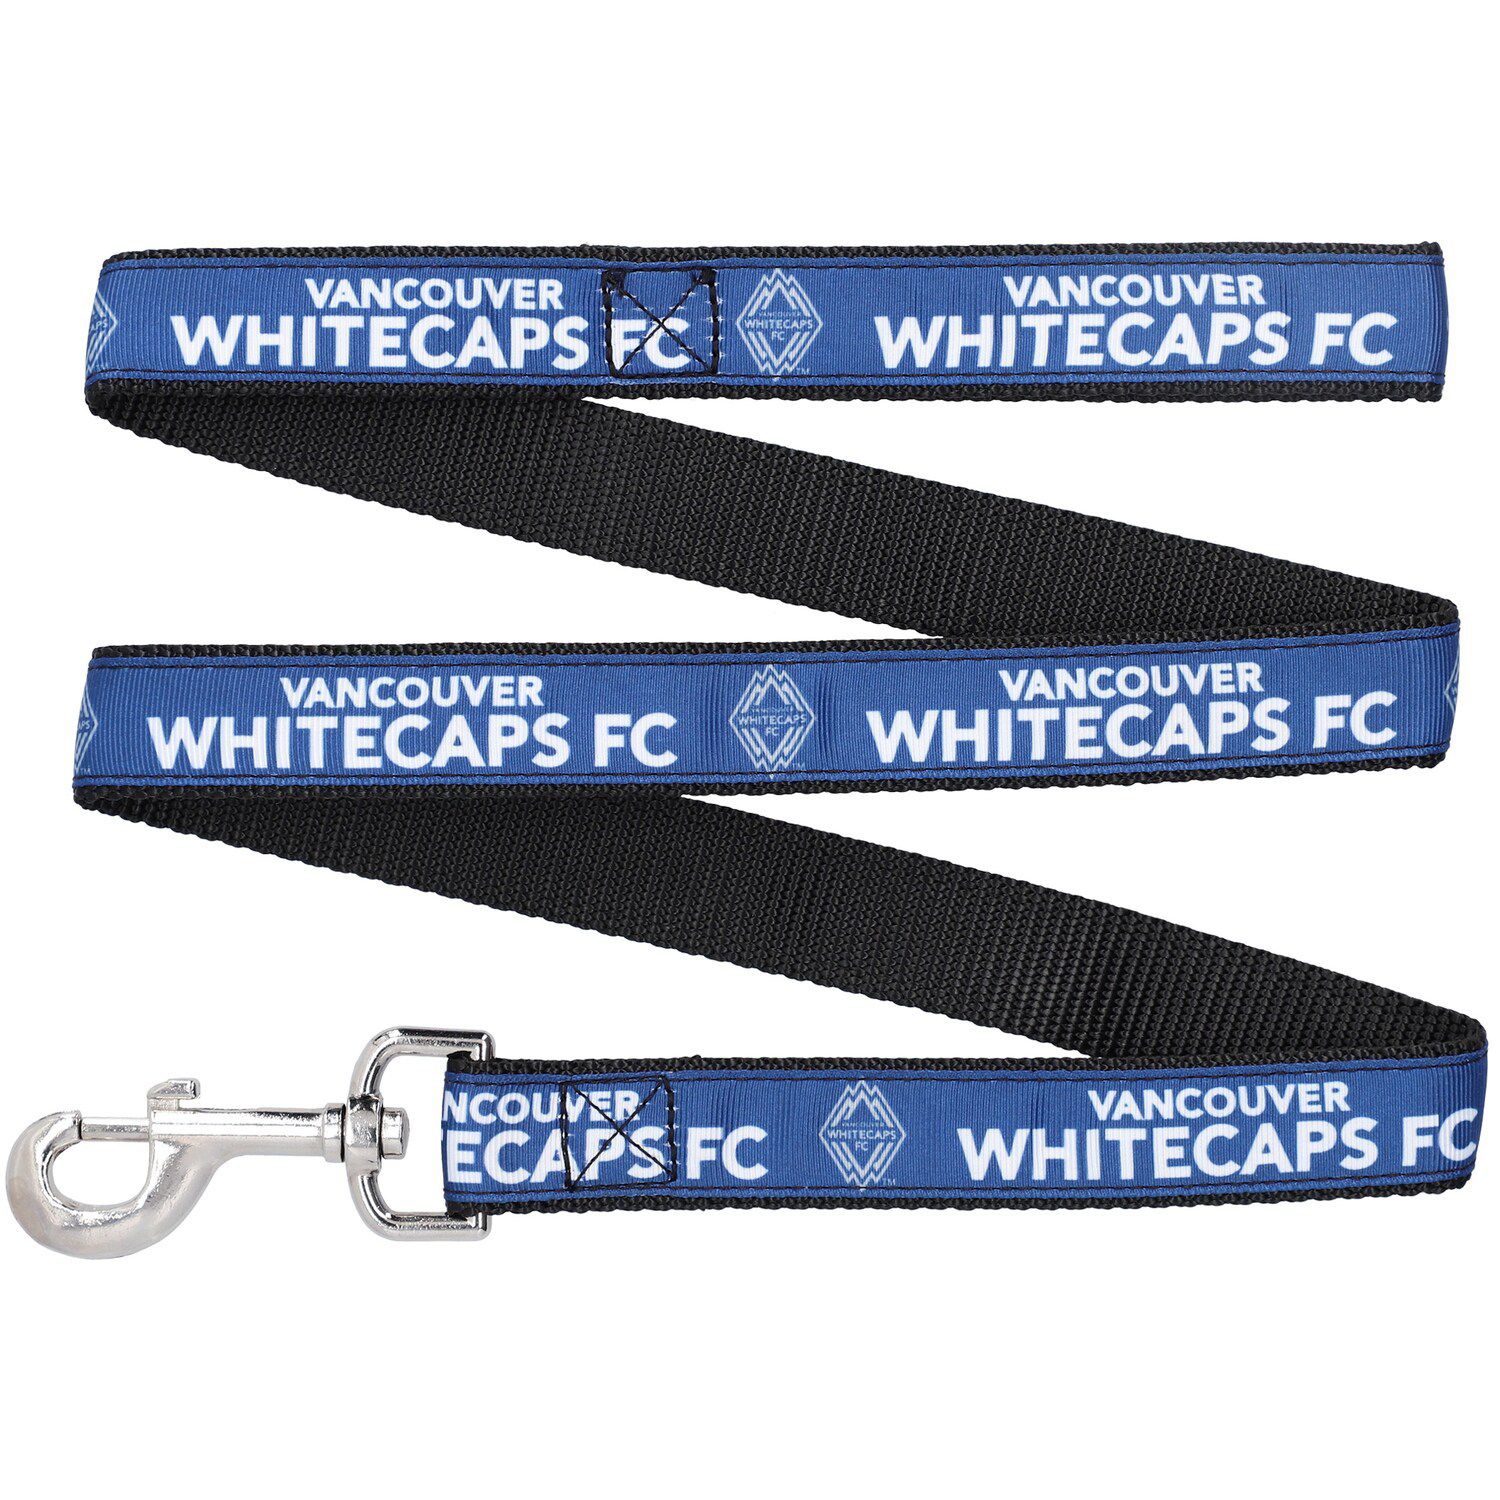 Image for Unbranded Vancouver Whitecaps FC Dog Leash at Kohl's.